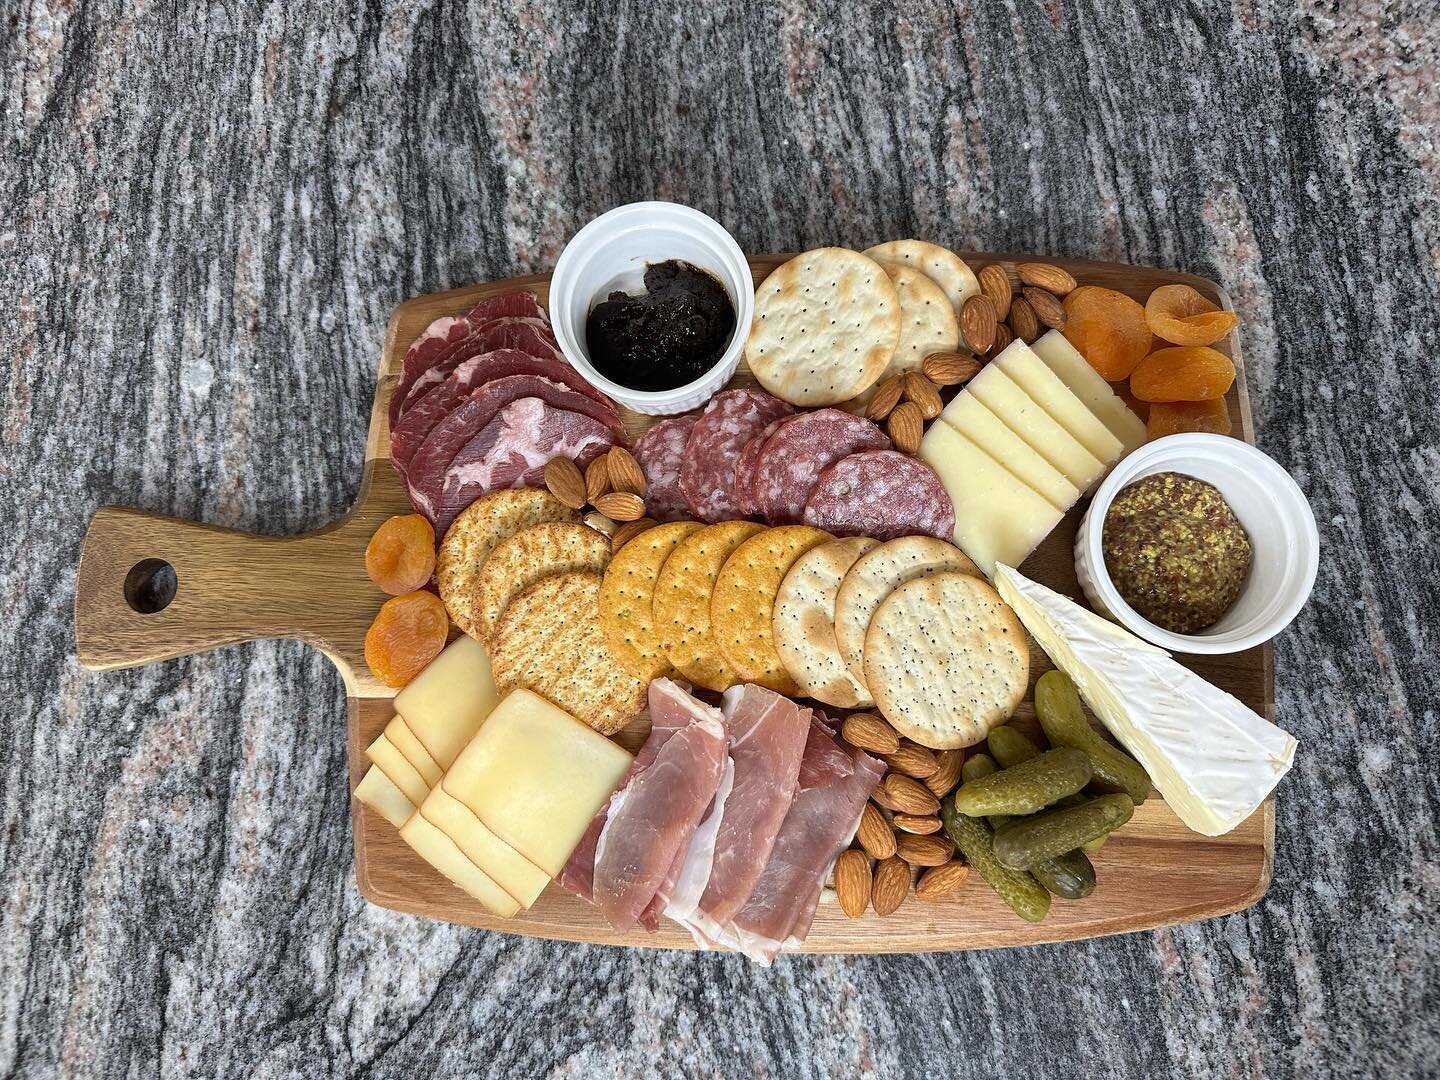 Are you excited for our first ever Karaoke night? So are we! 

We spent the weekend prepping by preparing our mouth-watering charcuterie board featuring prosciutto , capocollo, soppressata, artigiano aged in red wine, Brie, and smoked Gruy&egrave;re.